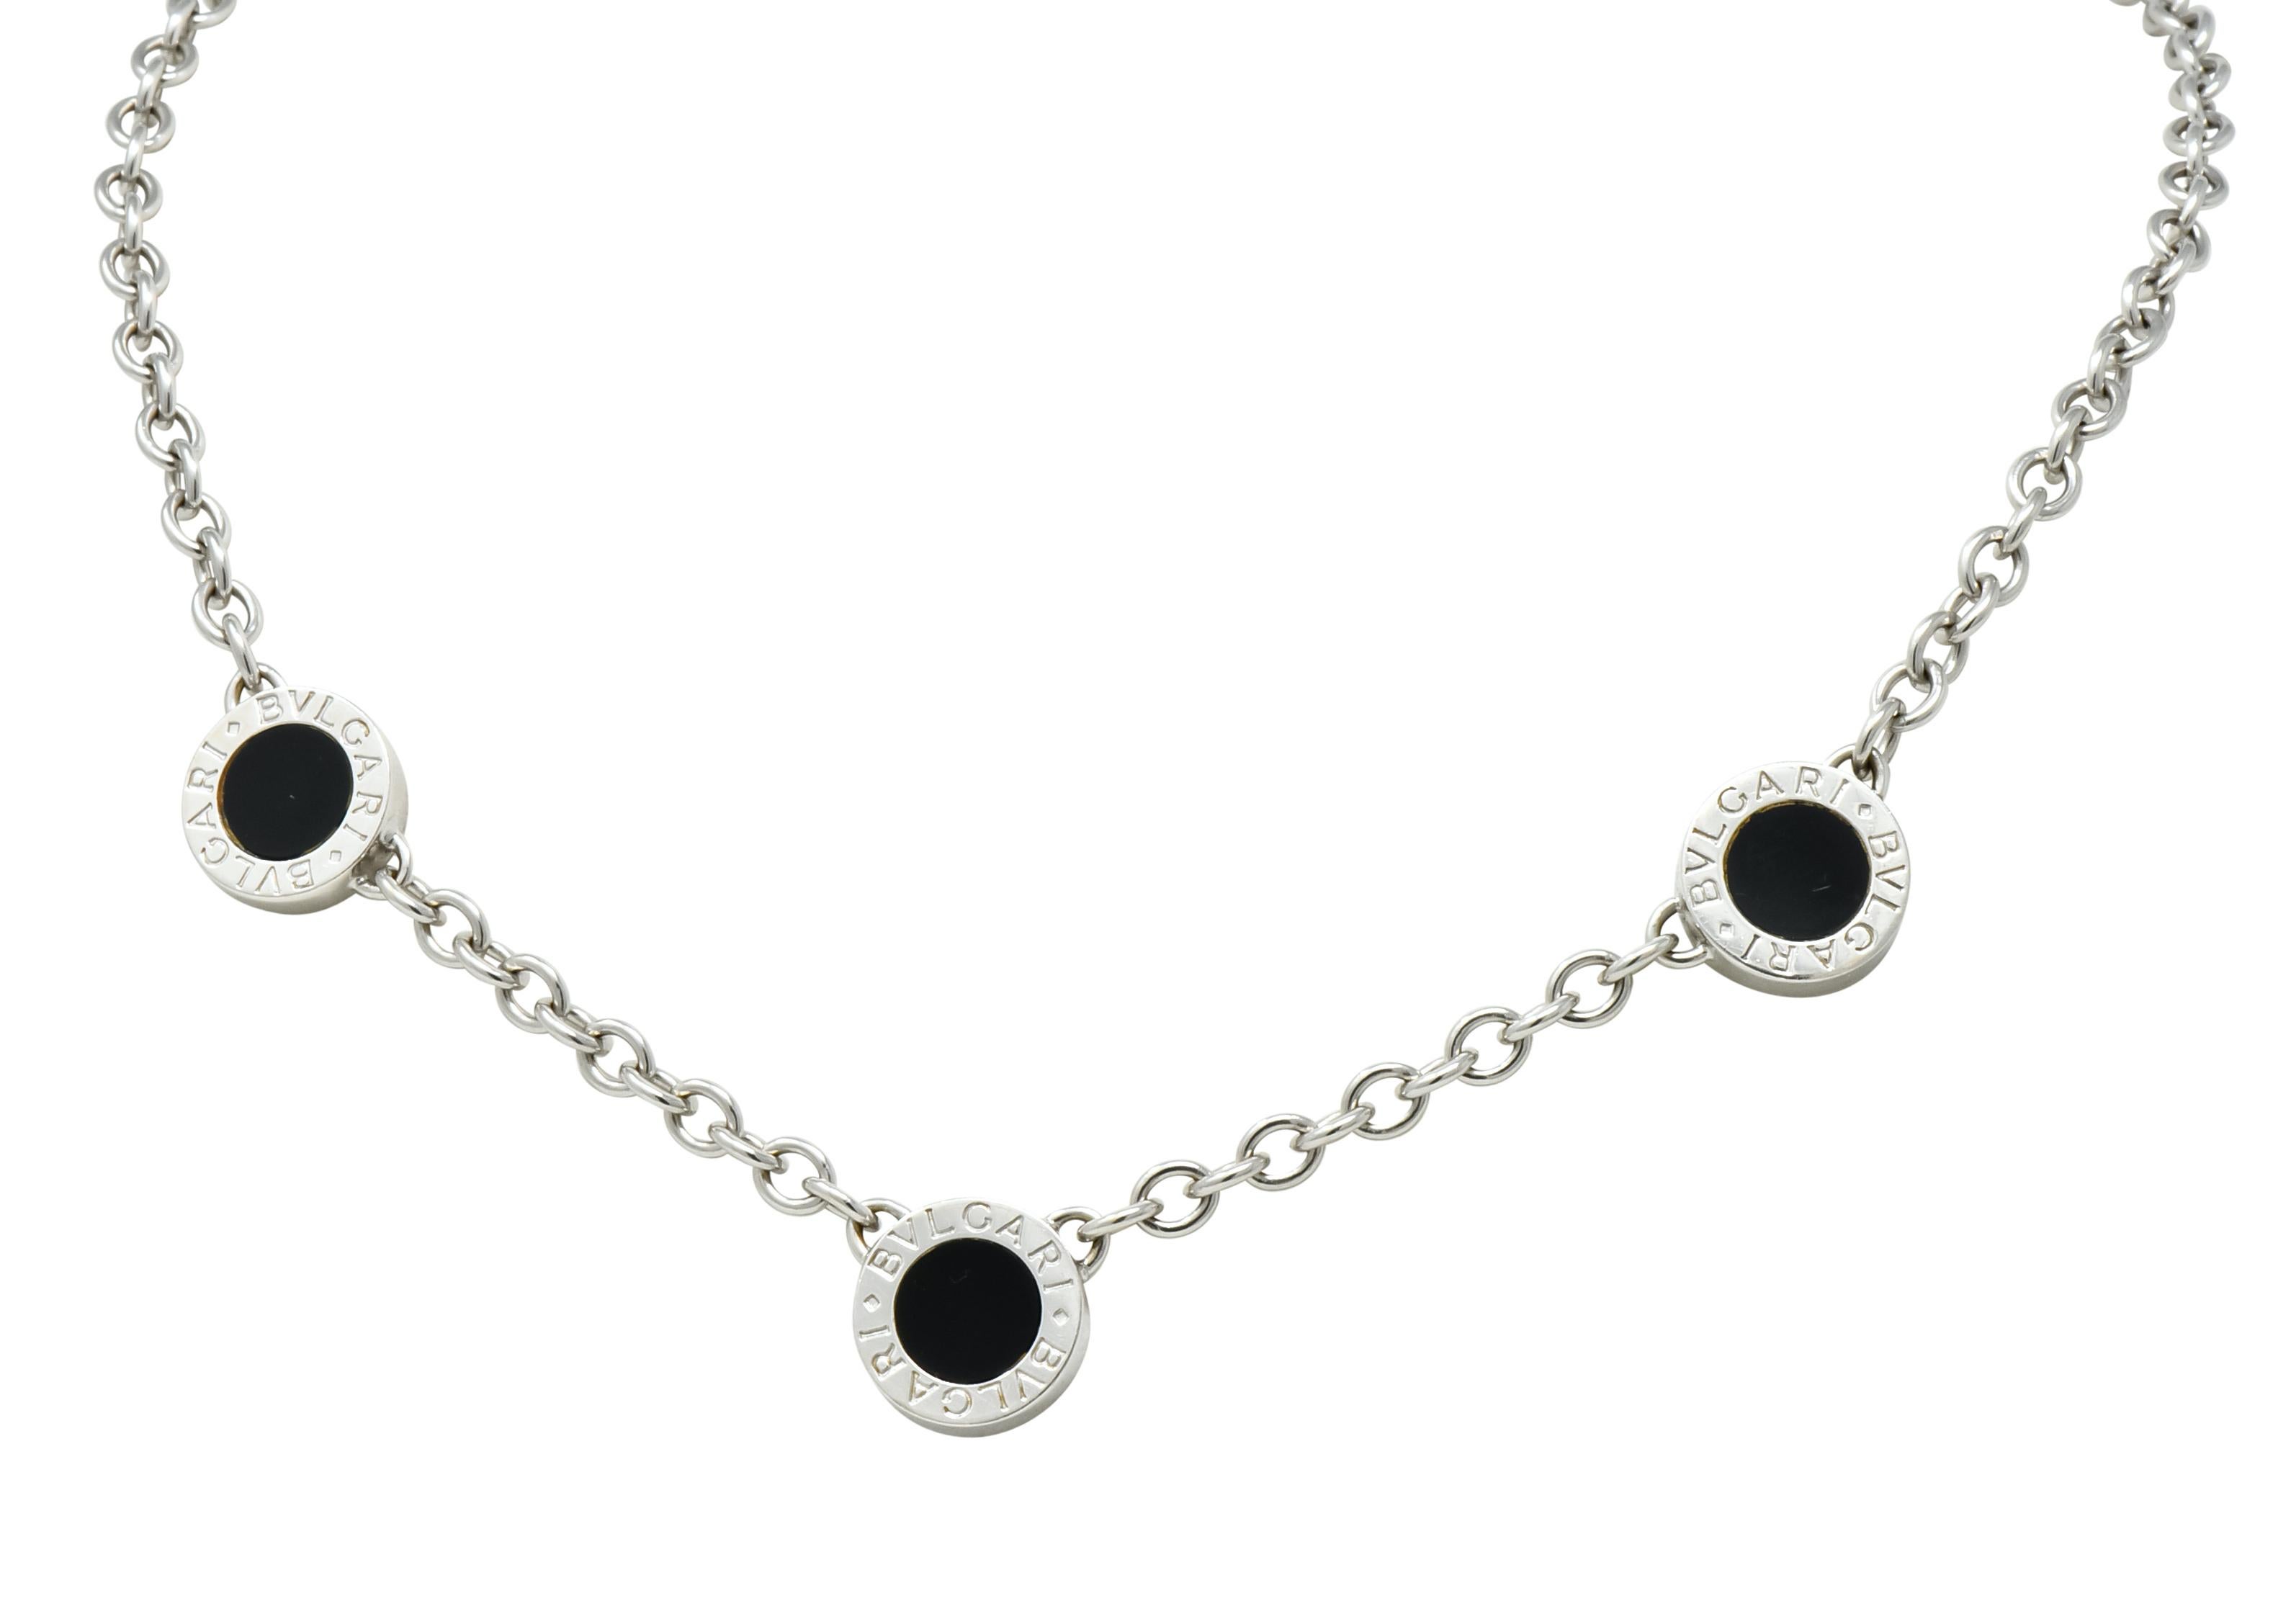 Necklace comprised of white gold cable chain with three, front facing, disk stations 

Stations are inlaid on one side with smooth circles of black onyx, while opposing side is pavé set with round brilliant cut diamonds weighing approximately 1.15